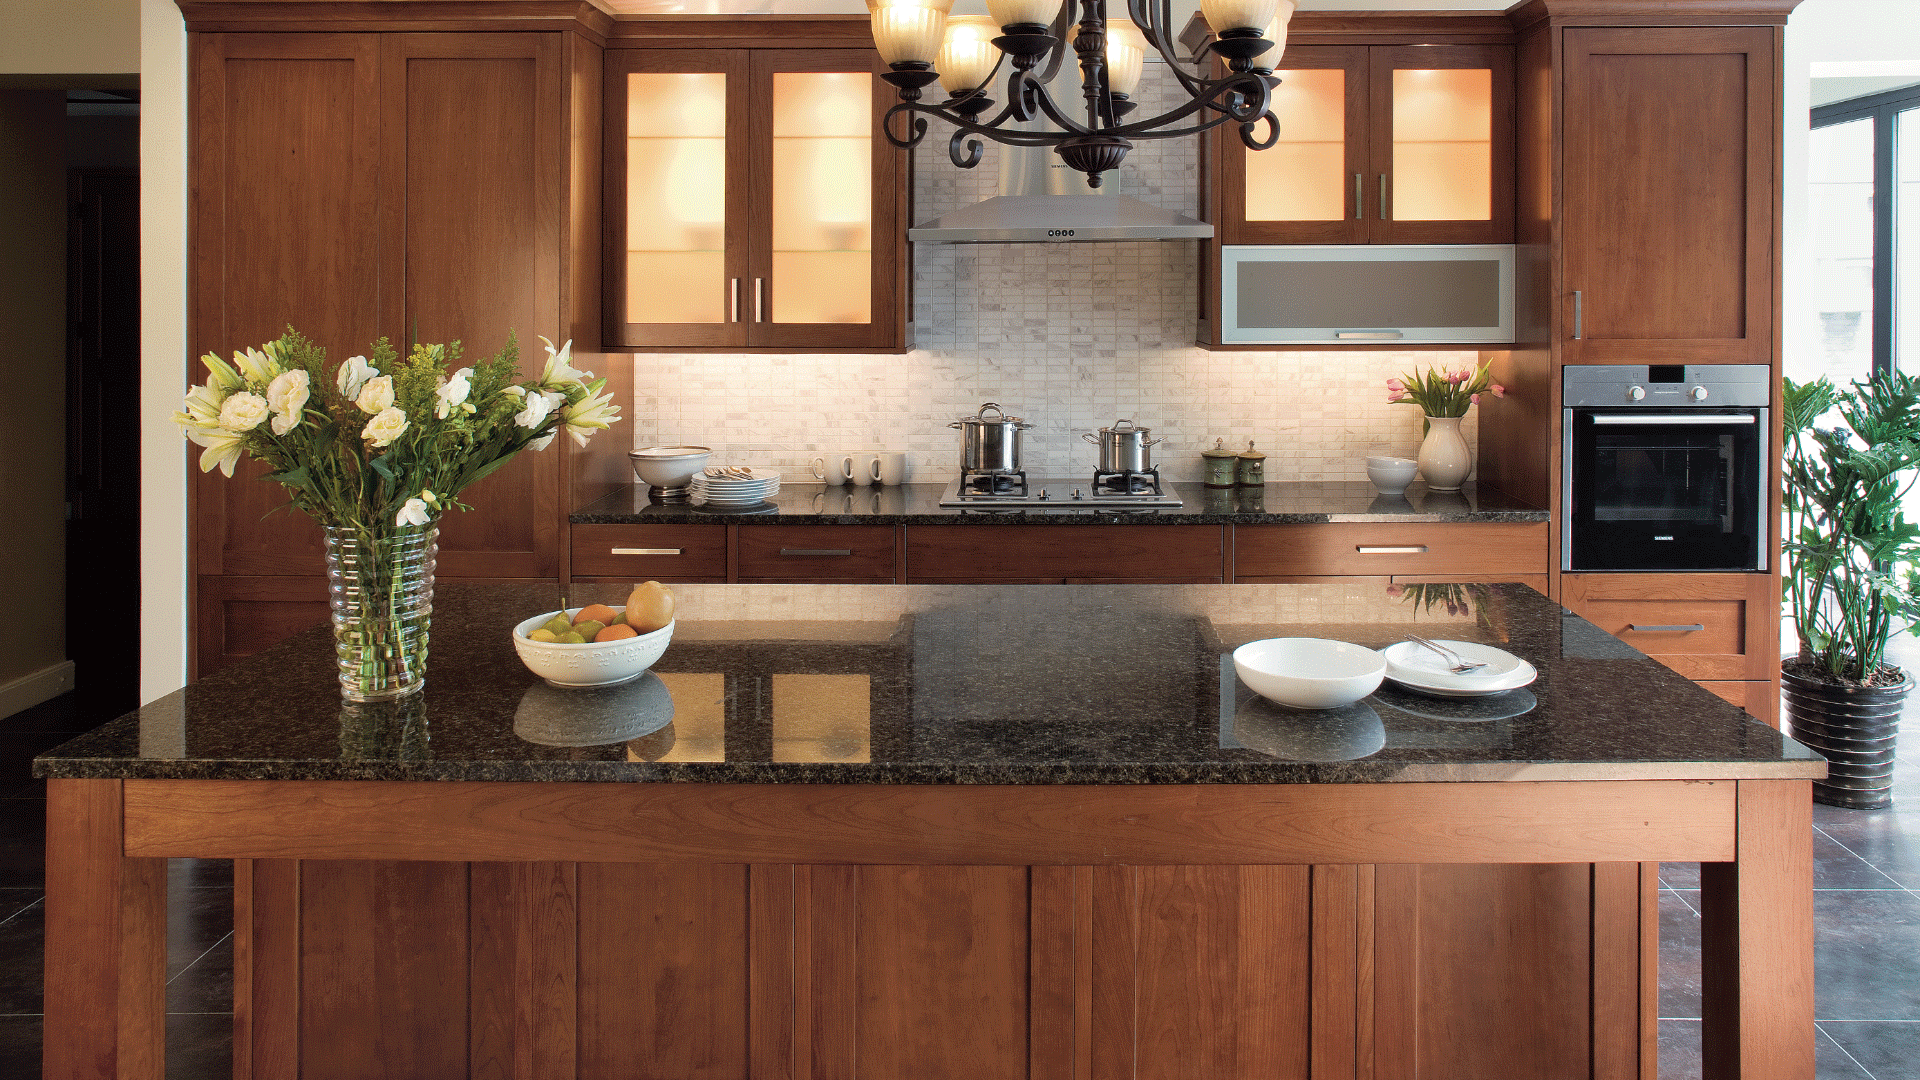 St. Martin wood kitchen cabinets with black countertops